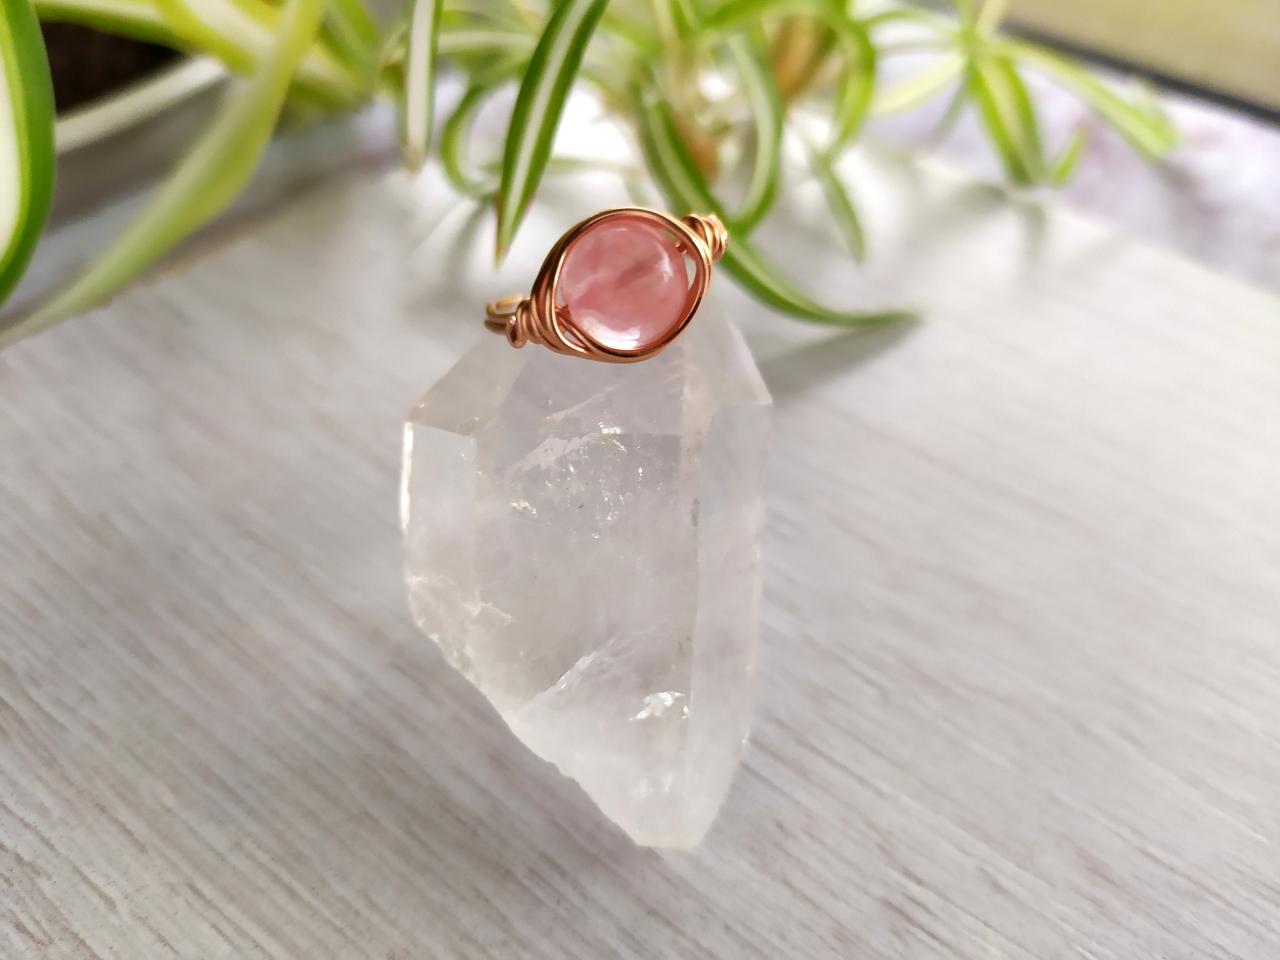 Wire Wrapped Pink Gemstone Ring, Simple Wire Band Ring With Gemstone, Strawberry Quartz Copper Boho Ring, Stacking Crystal Ring, Pink Quartz